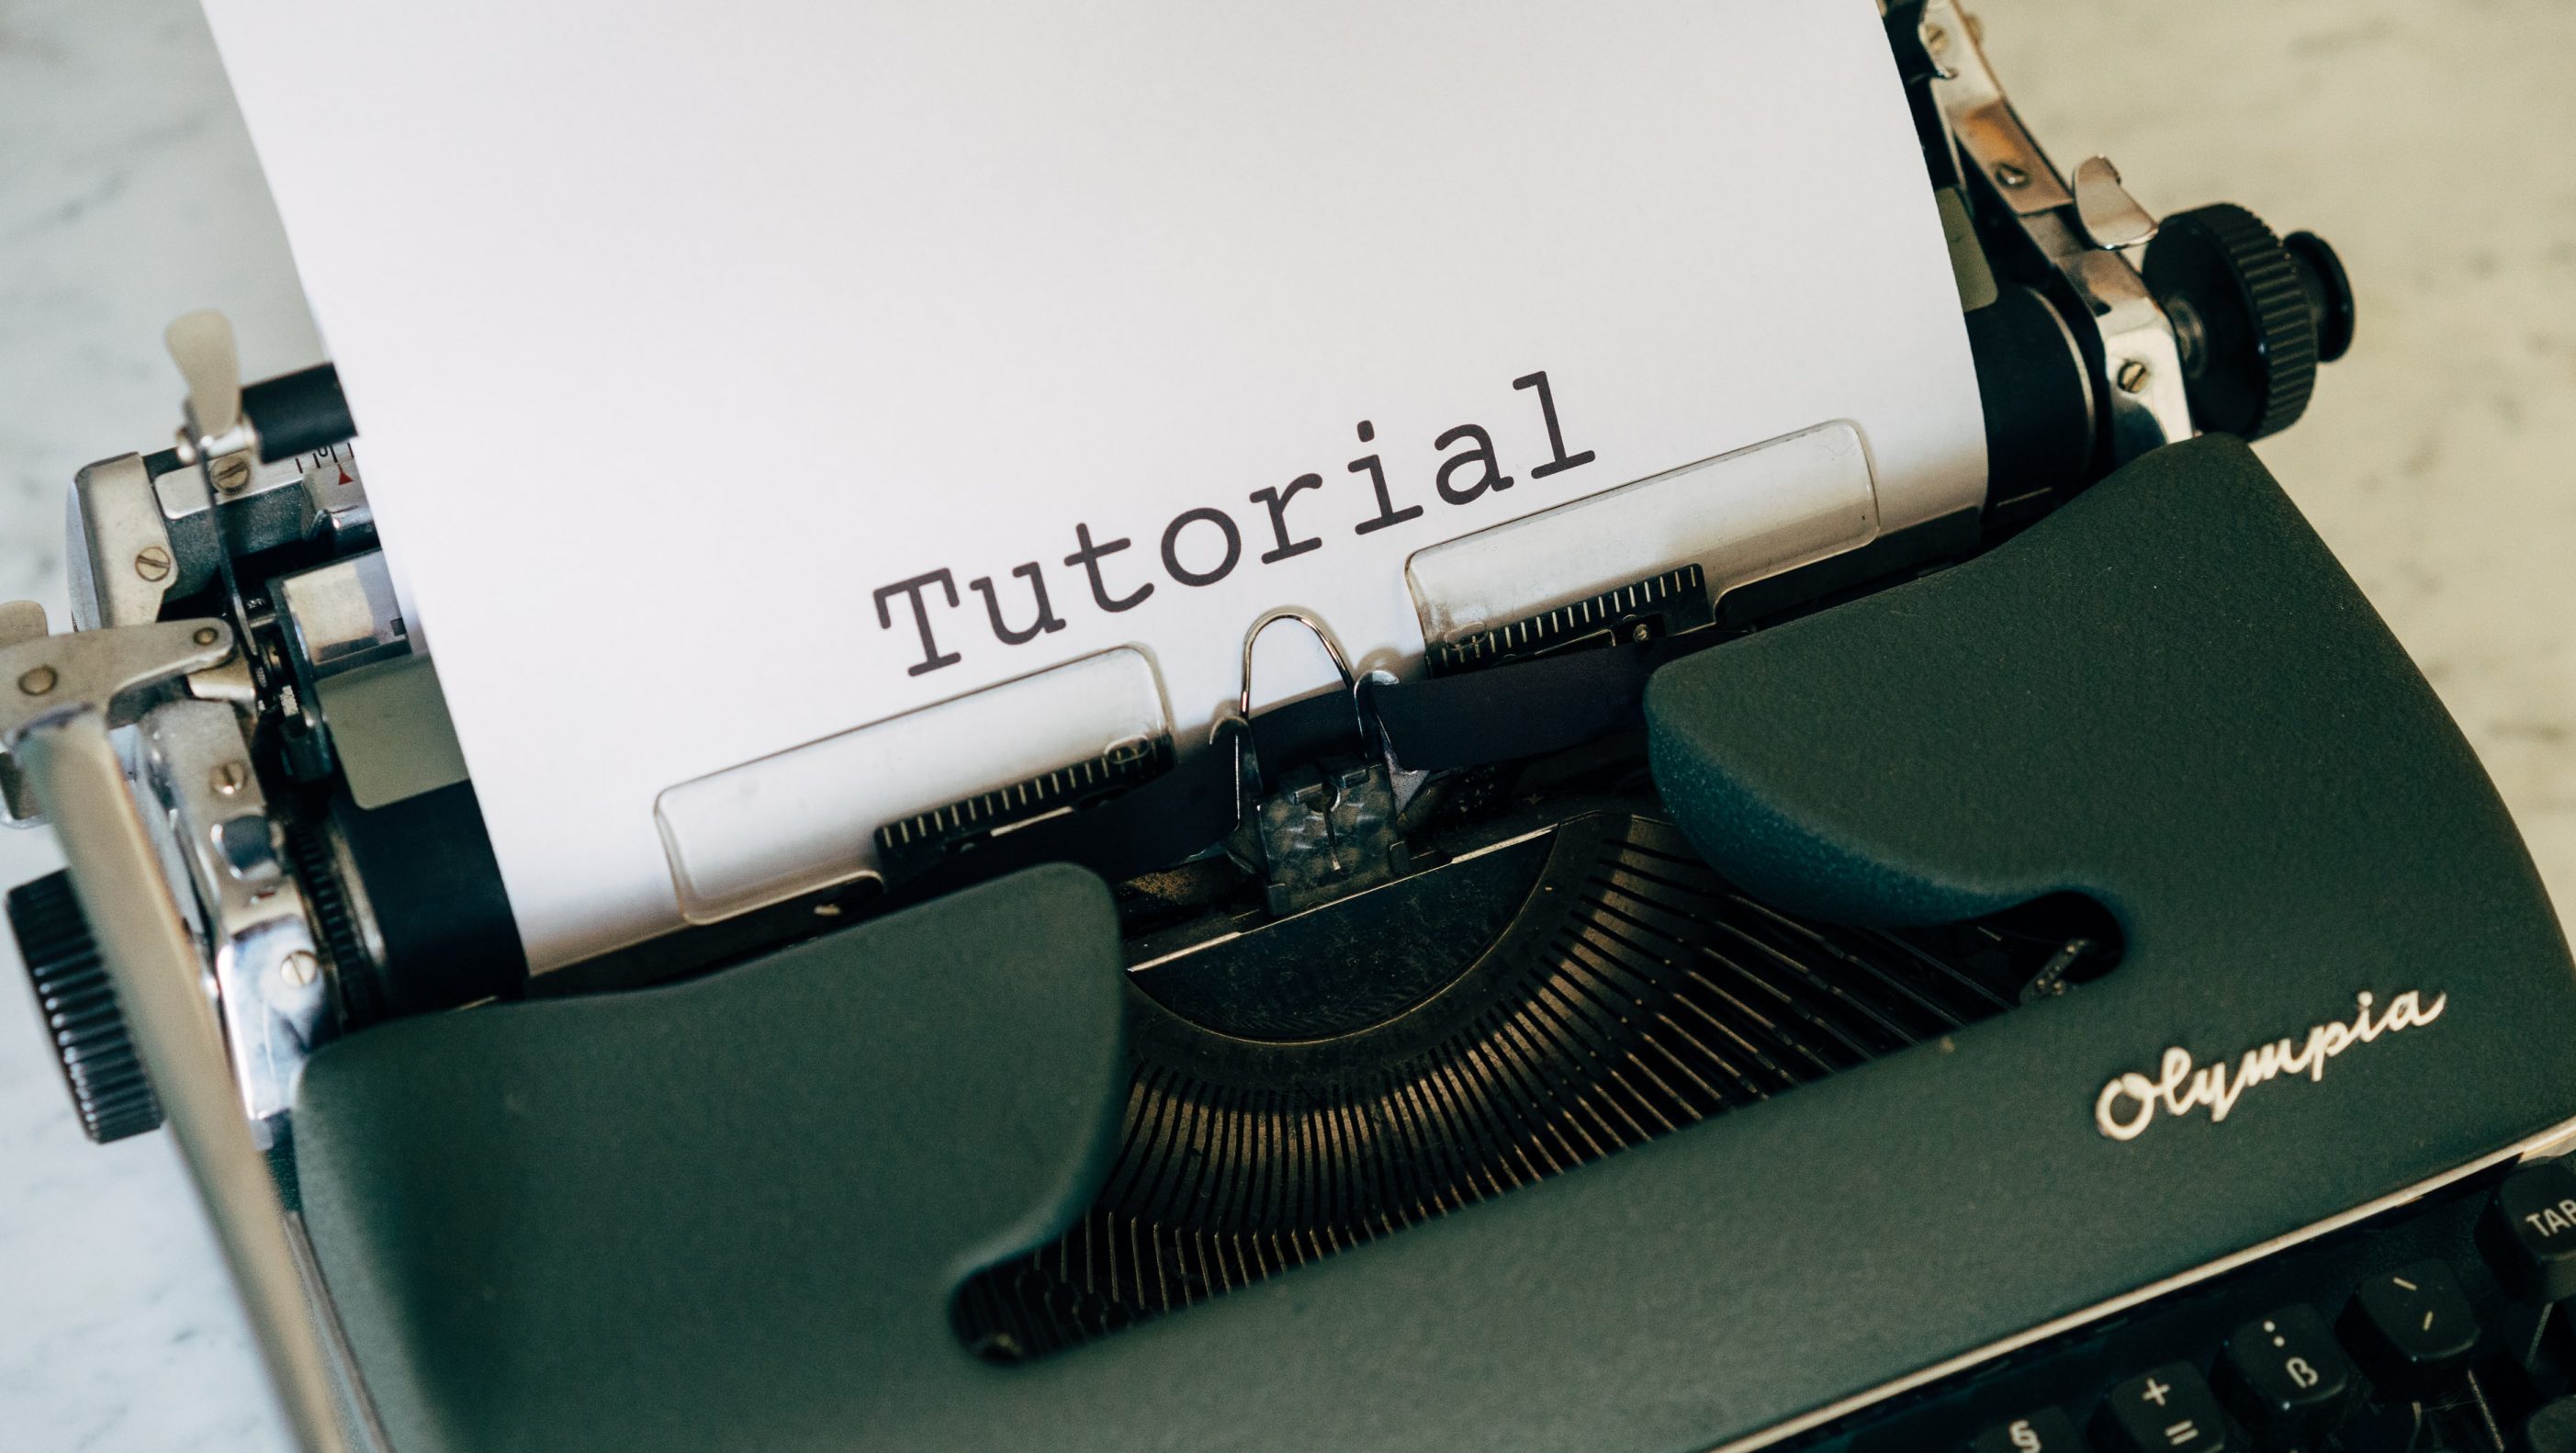 Typewriter with 'tutorial' spelled out - Blog article writing tutorial for beginners - Copify blog